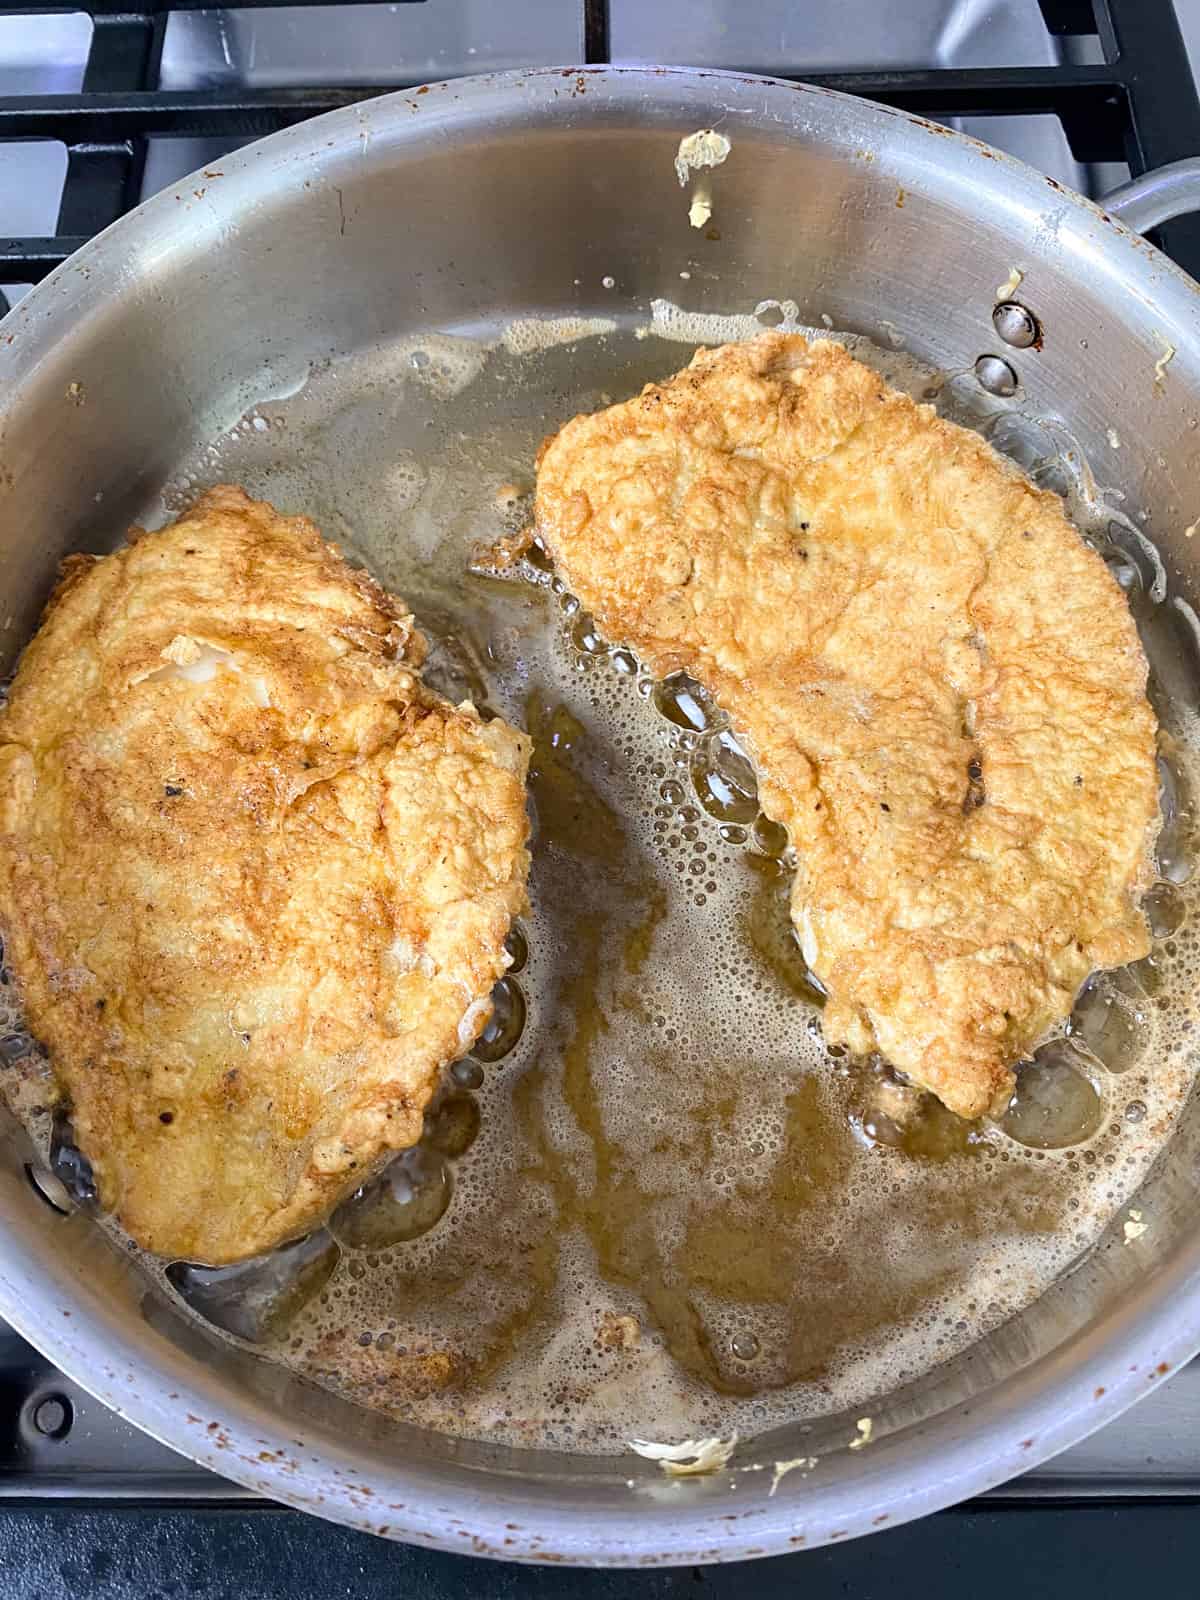 Cook the chicken cutlets on both sides until golden brown and cooked through.